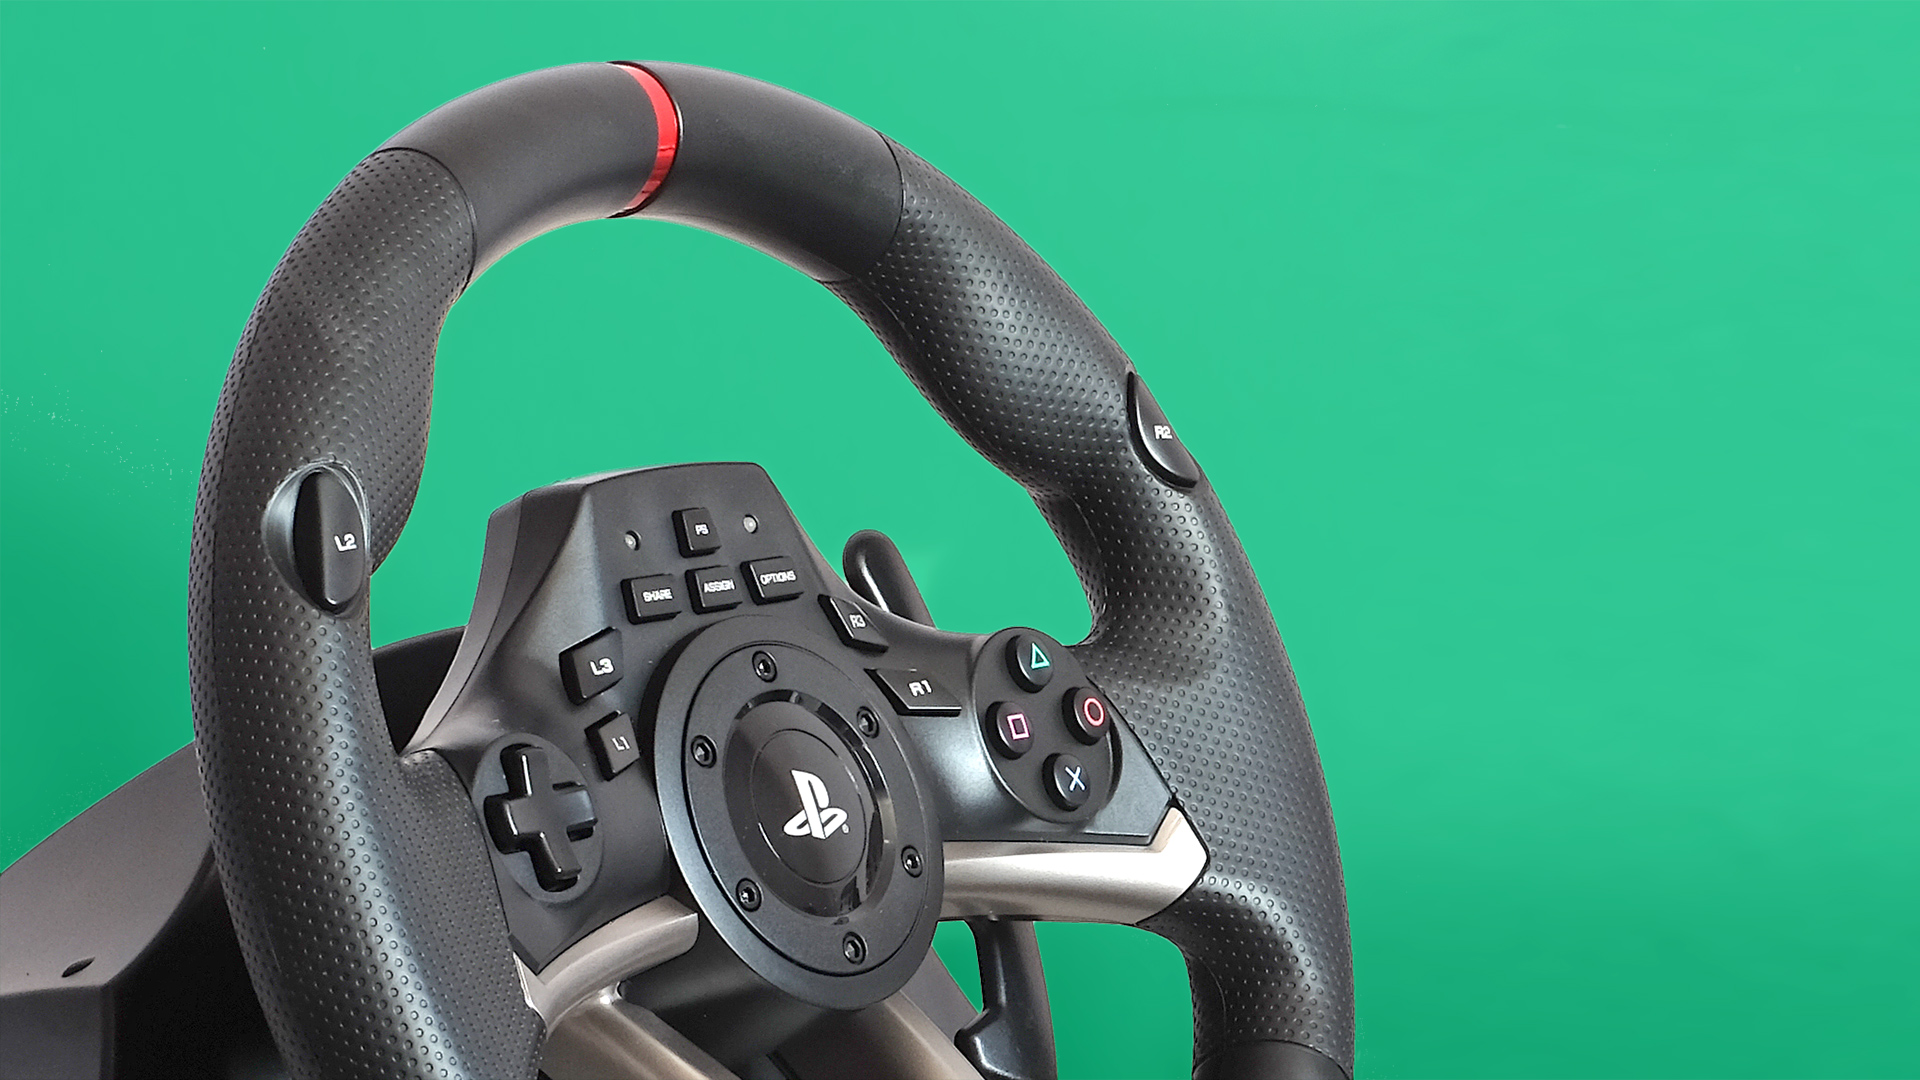 logitech g920 driving force racing wheel with pedals and force shifter for xbox & pc